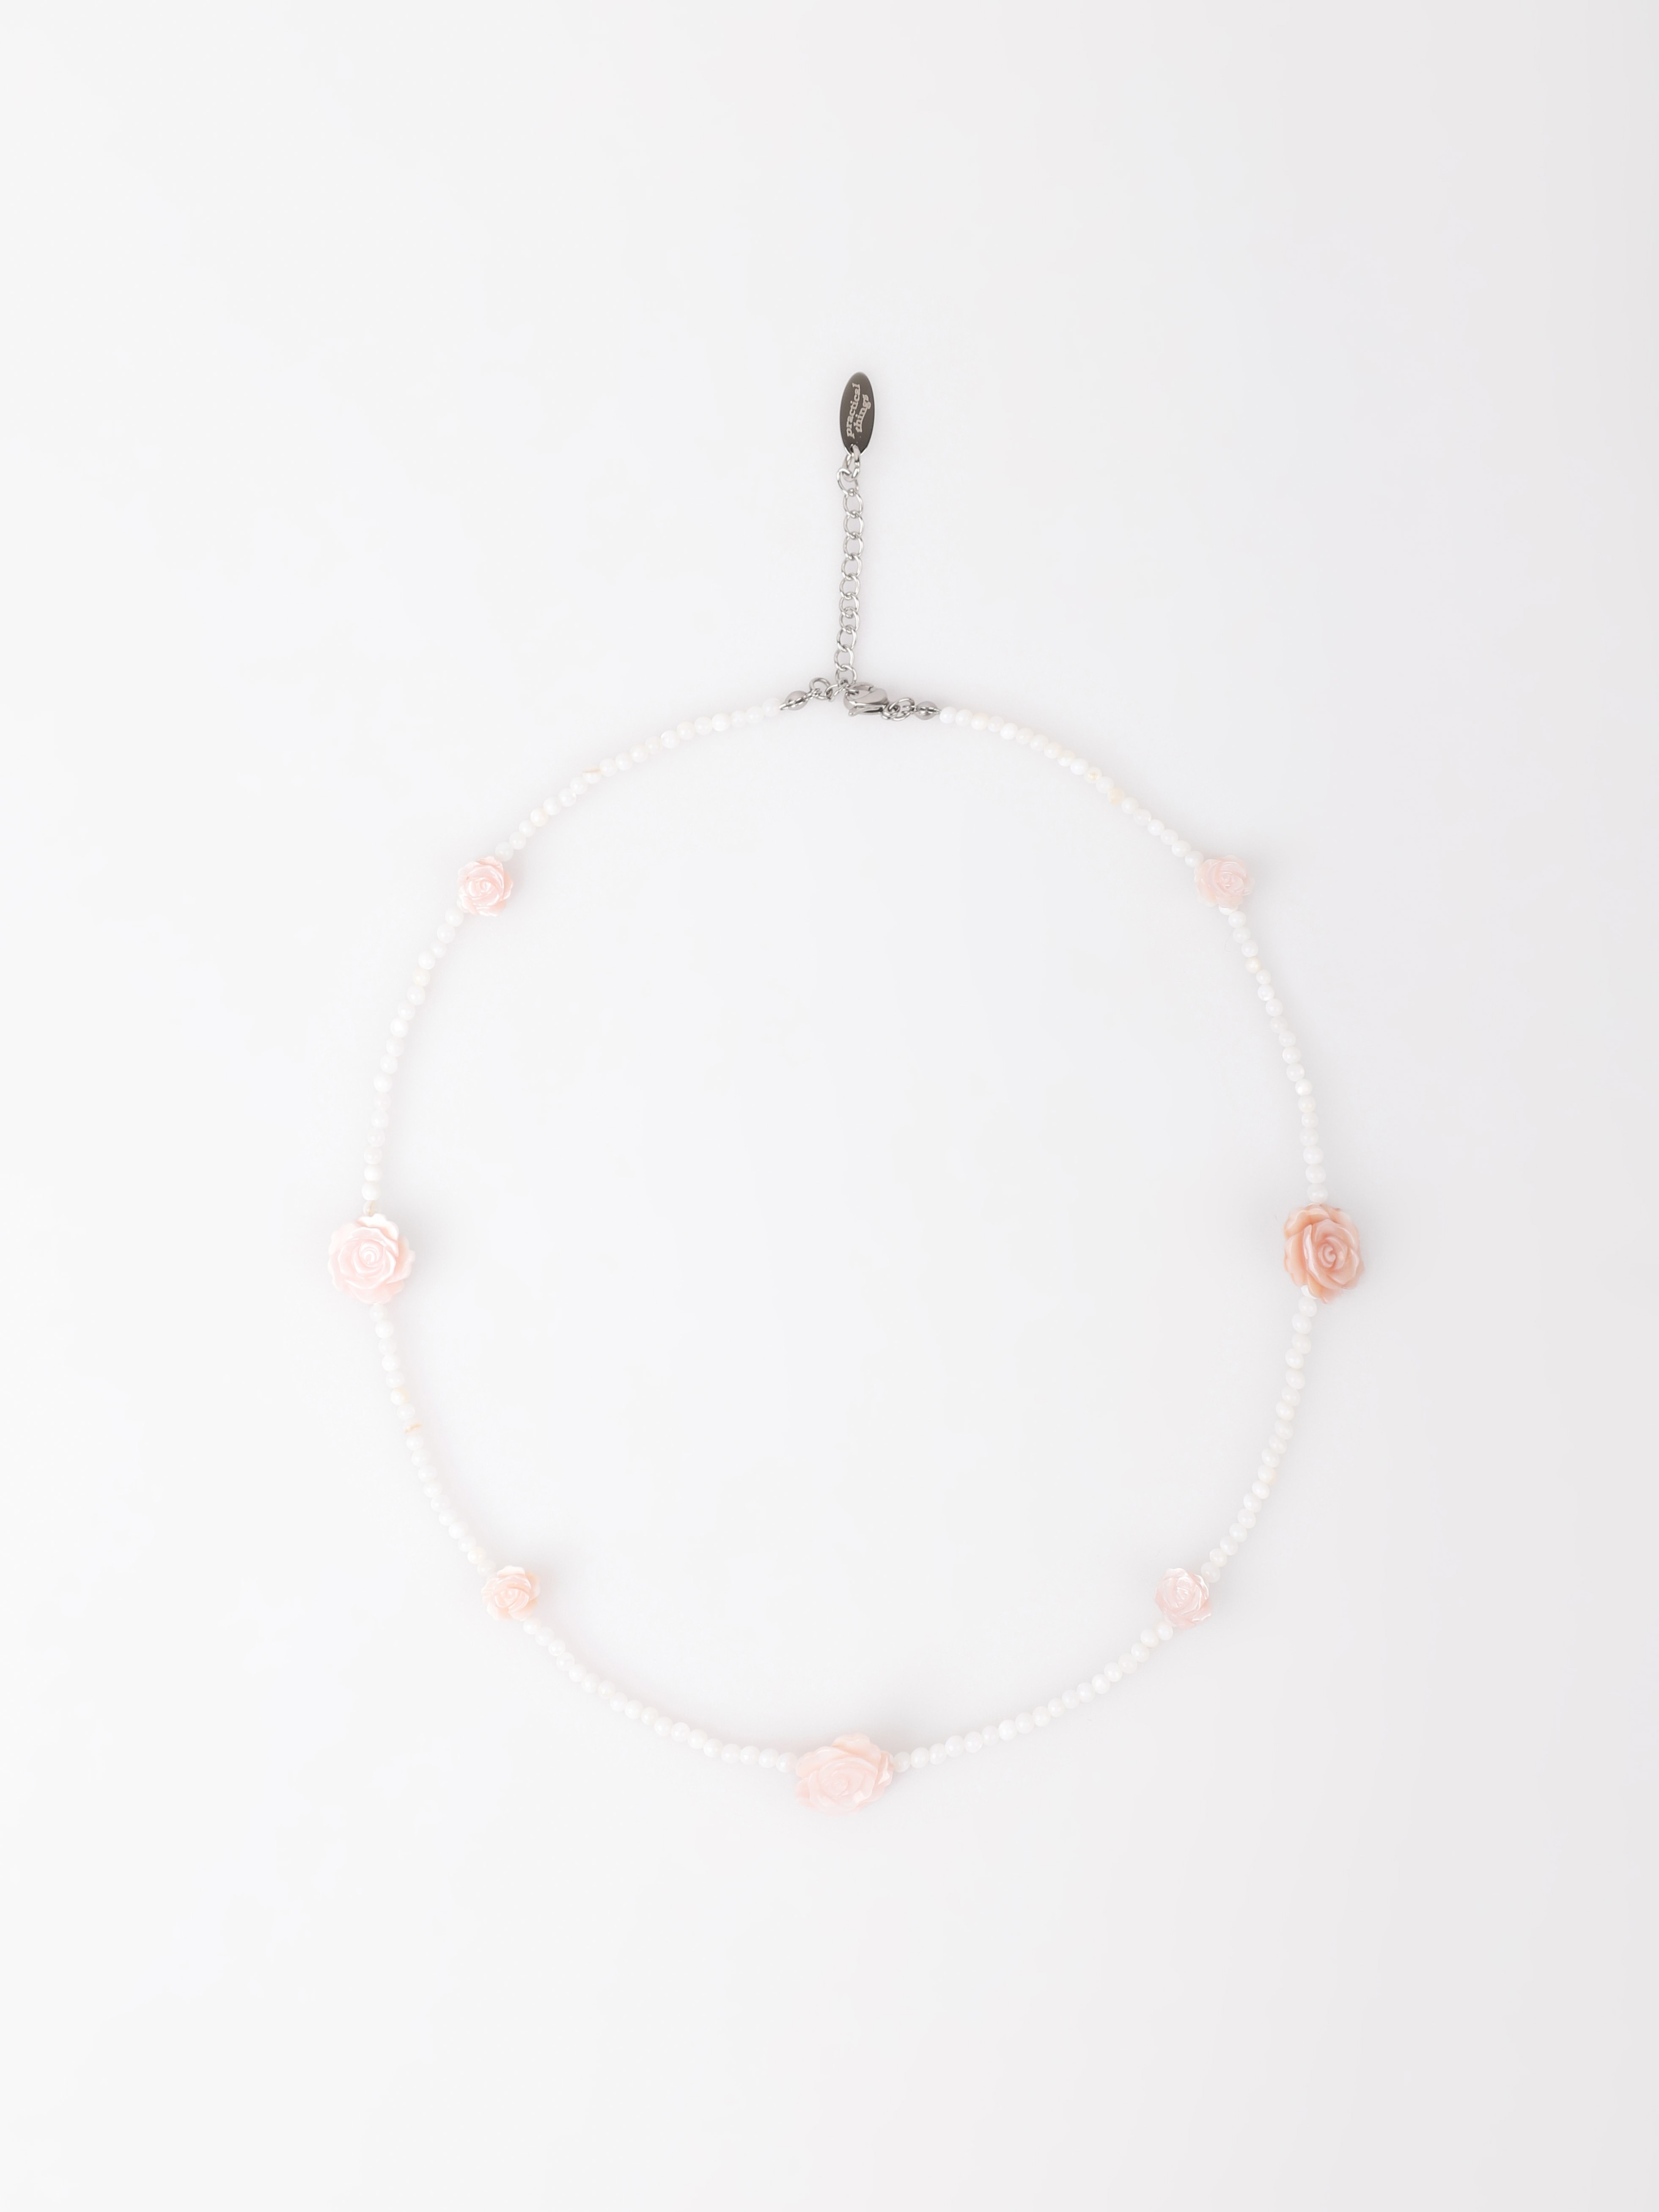 Lucy Rosie Necklace - Peach Rose